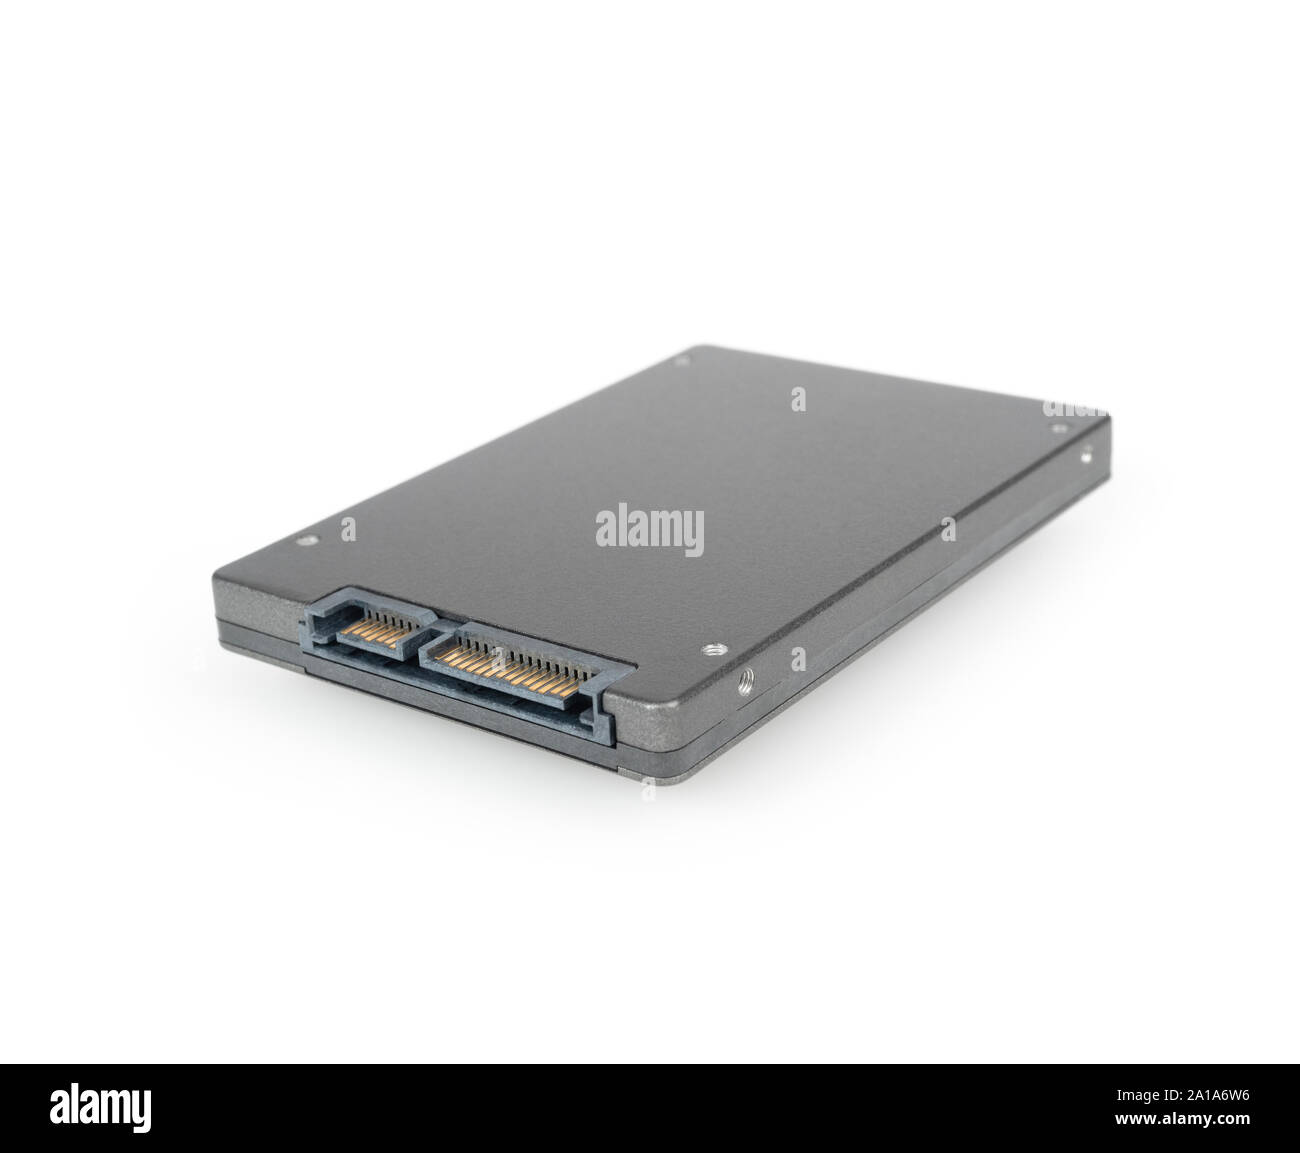 Fitting a Solid State Drive is one of the ways to extend the life of a computer. Stock Photo